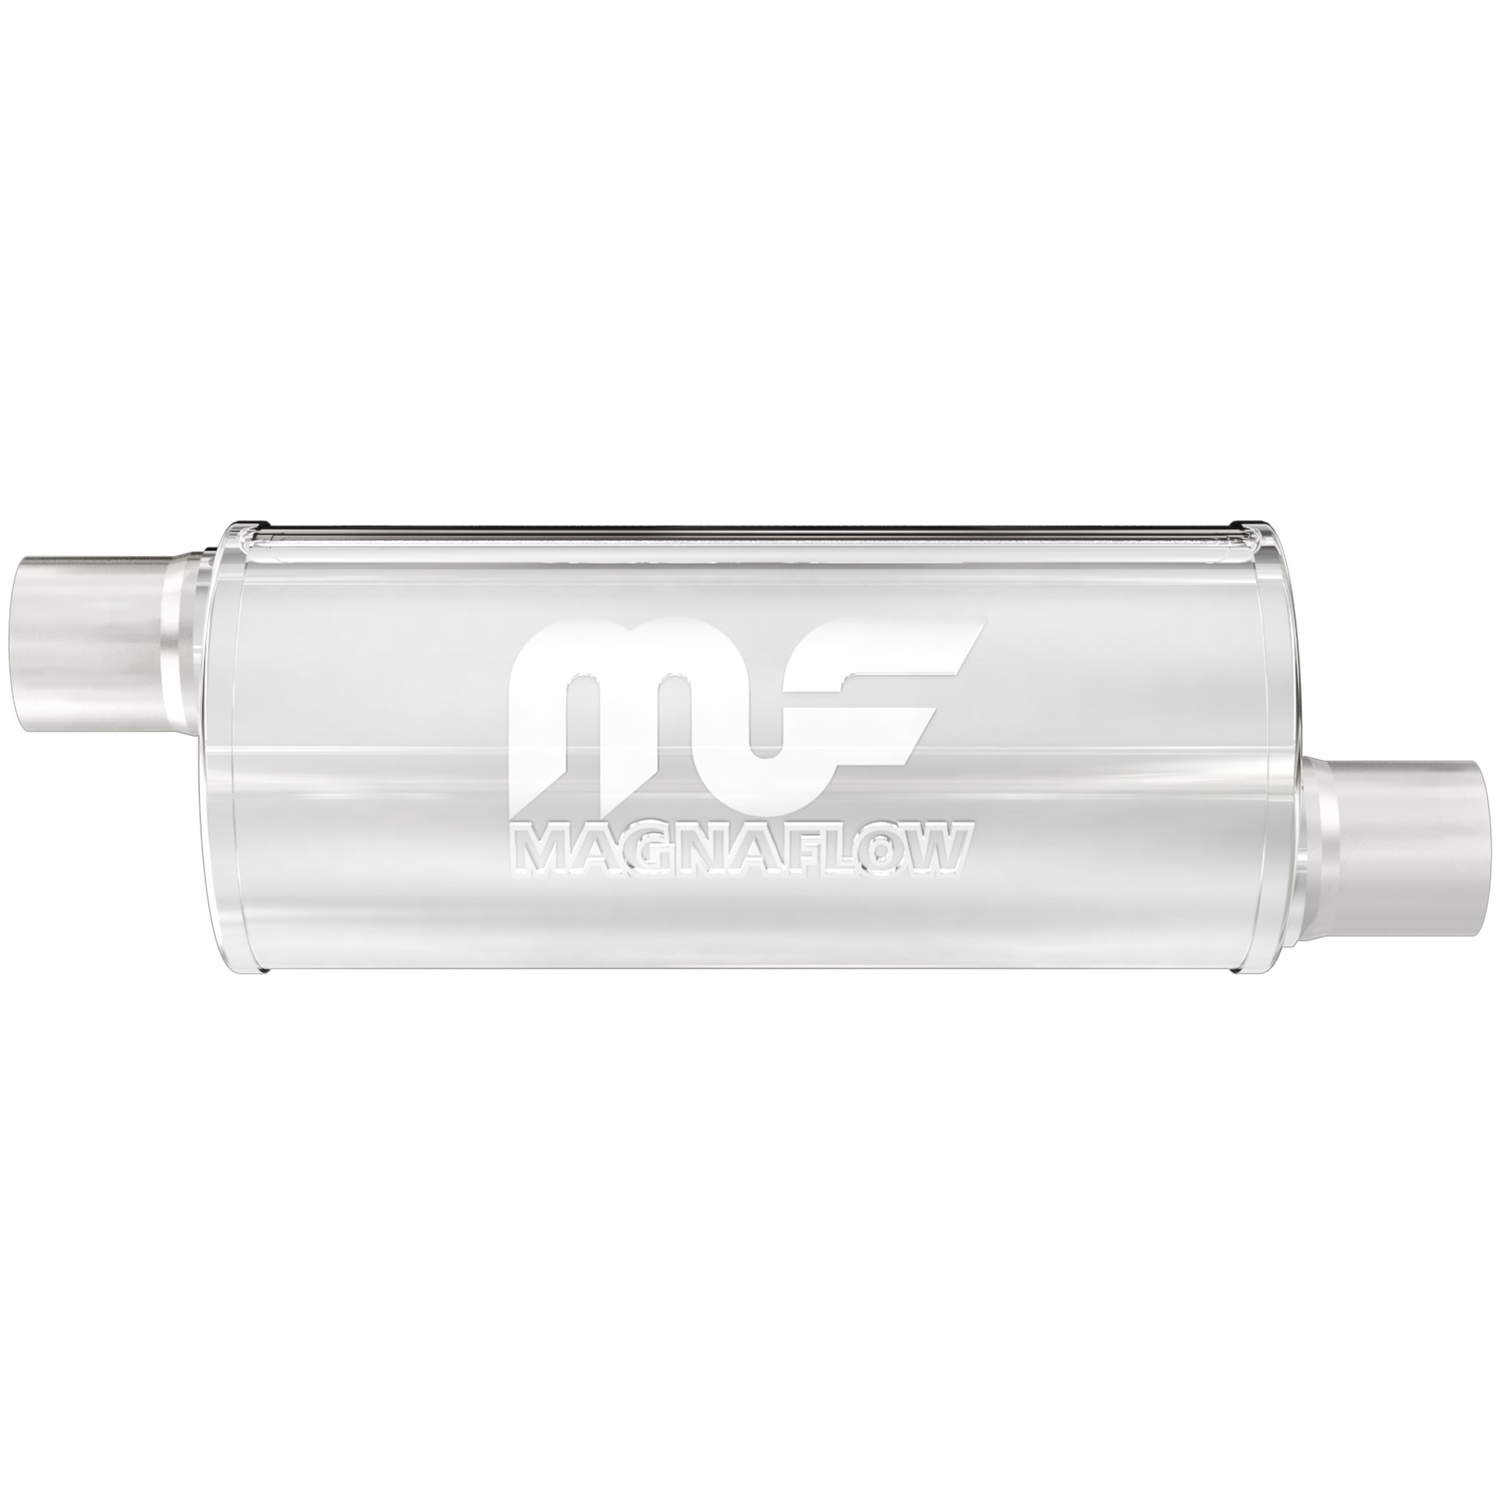 6" Round Muffler Offset In/Offset Out: 2"/2" Body Length: 14" Overall Length: 20" Core Size: 2.5" Satin Finish